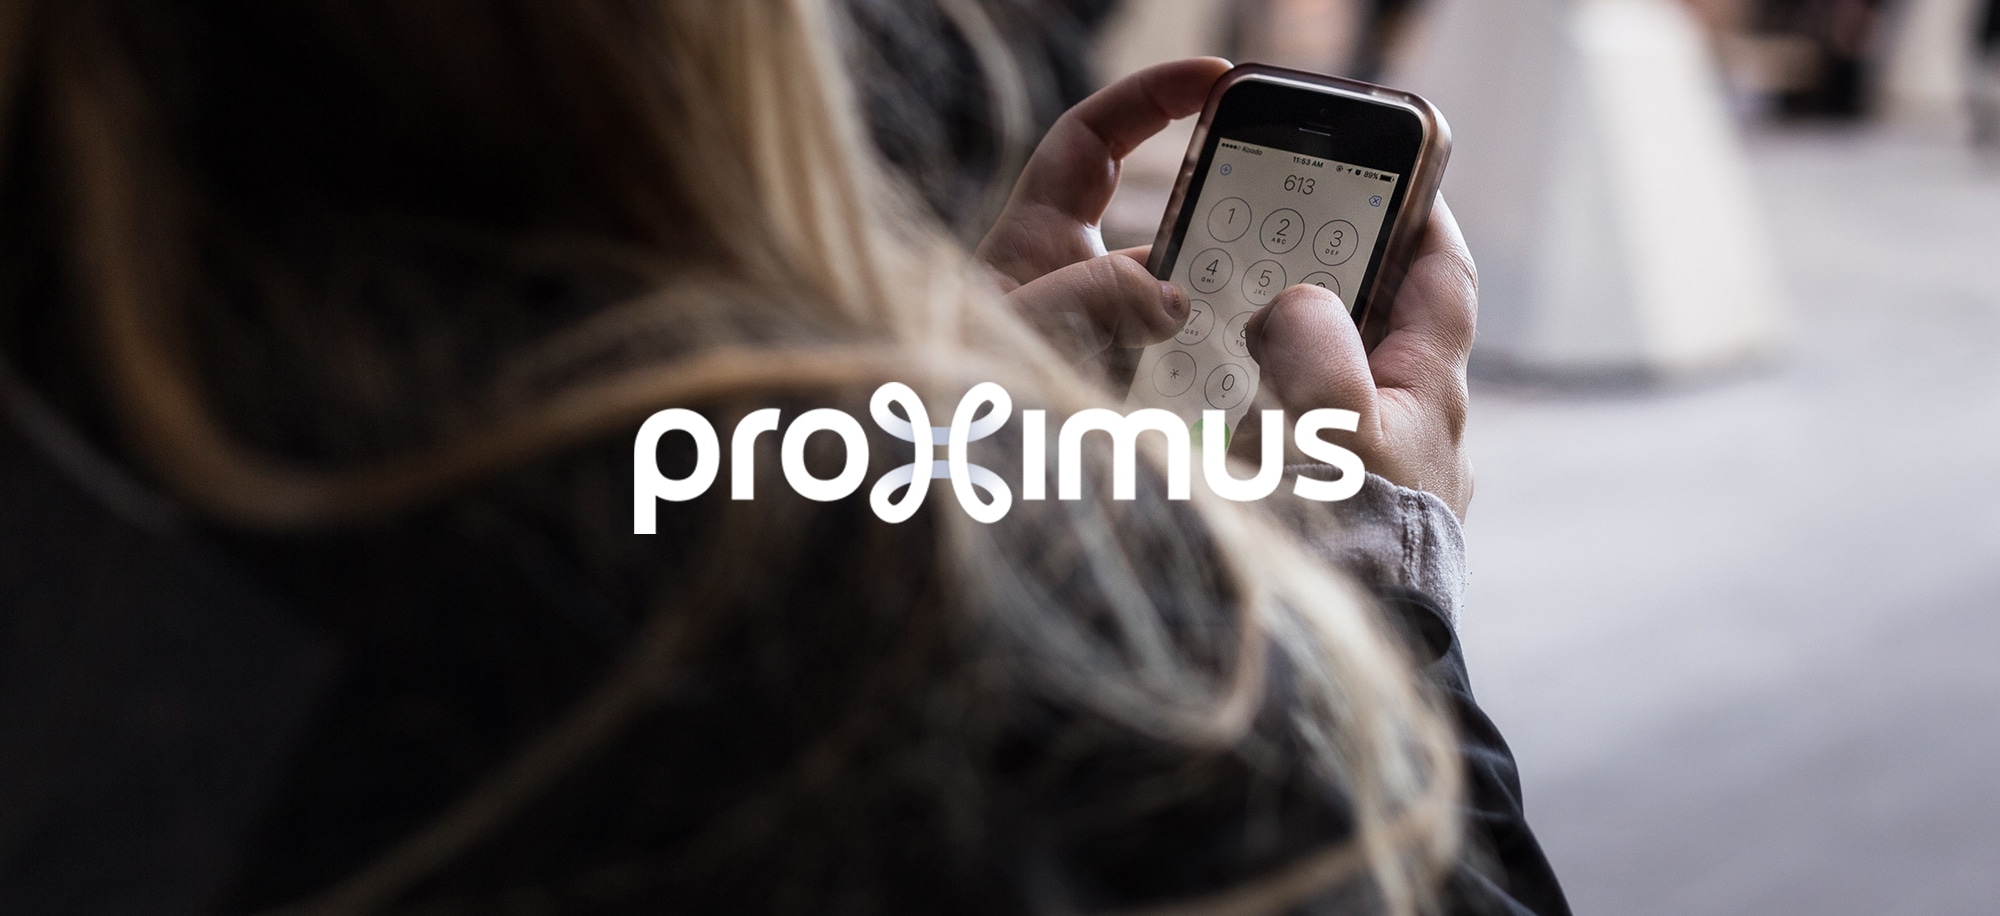 Proximus transforms with an insights platform